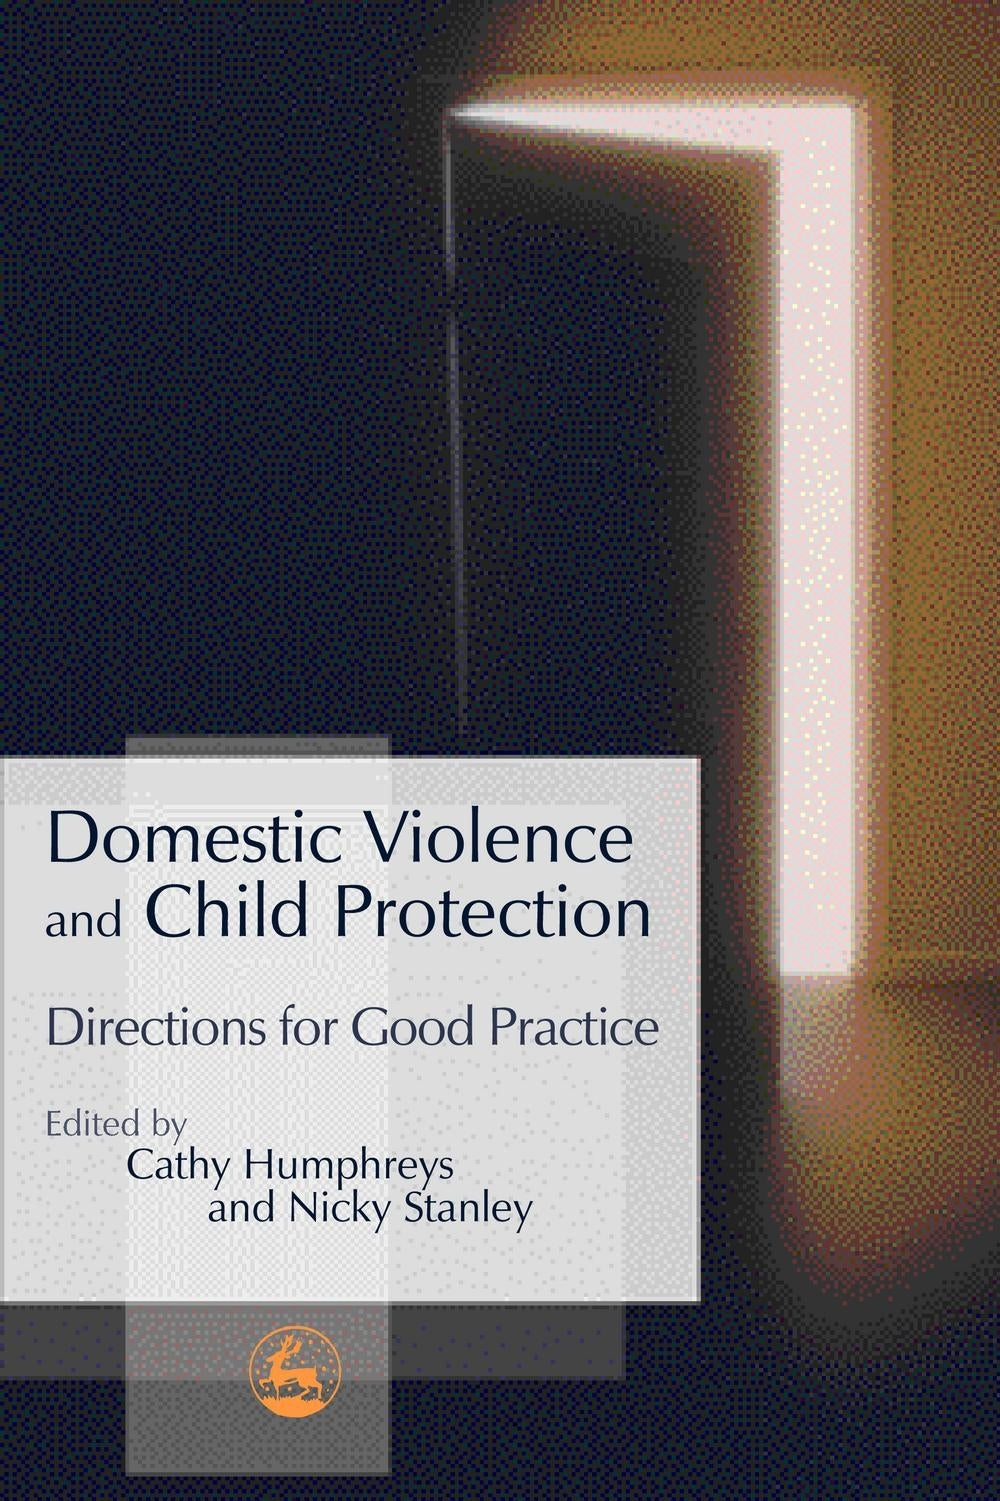 Domestic Violence and Child Protection by Nicky Stanley, Cathy Humphreys, No Author Listed